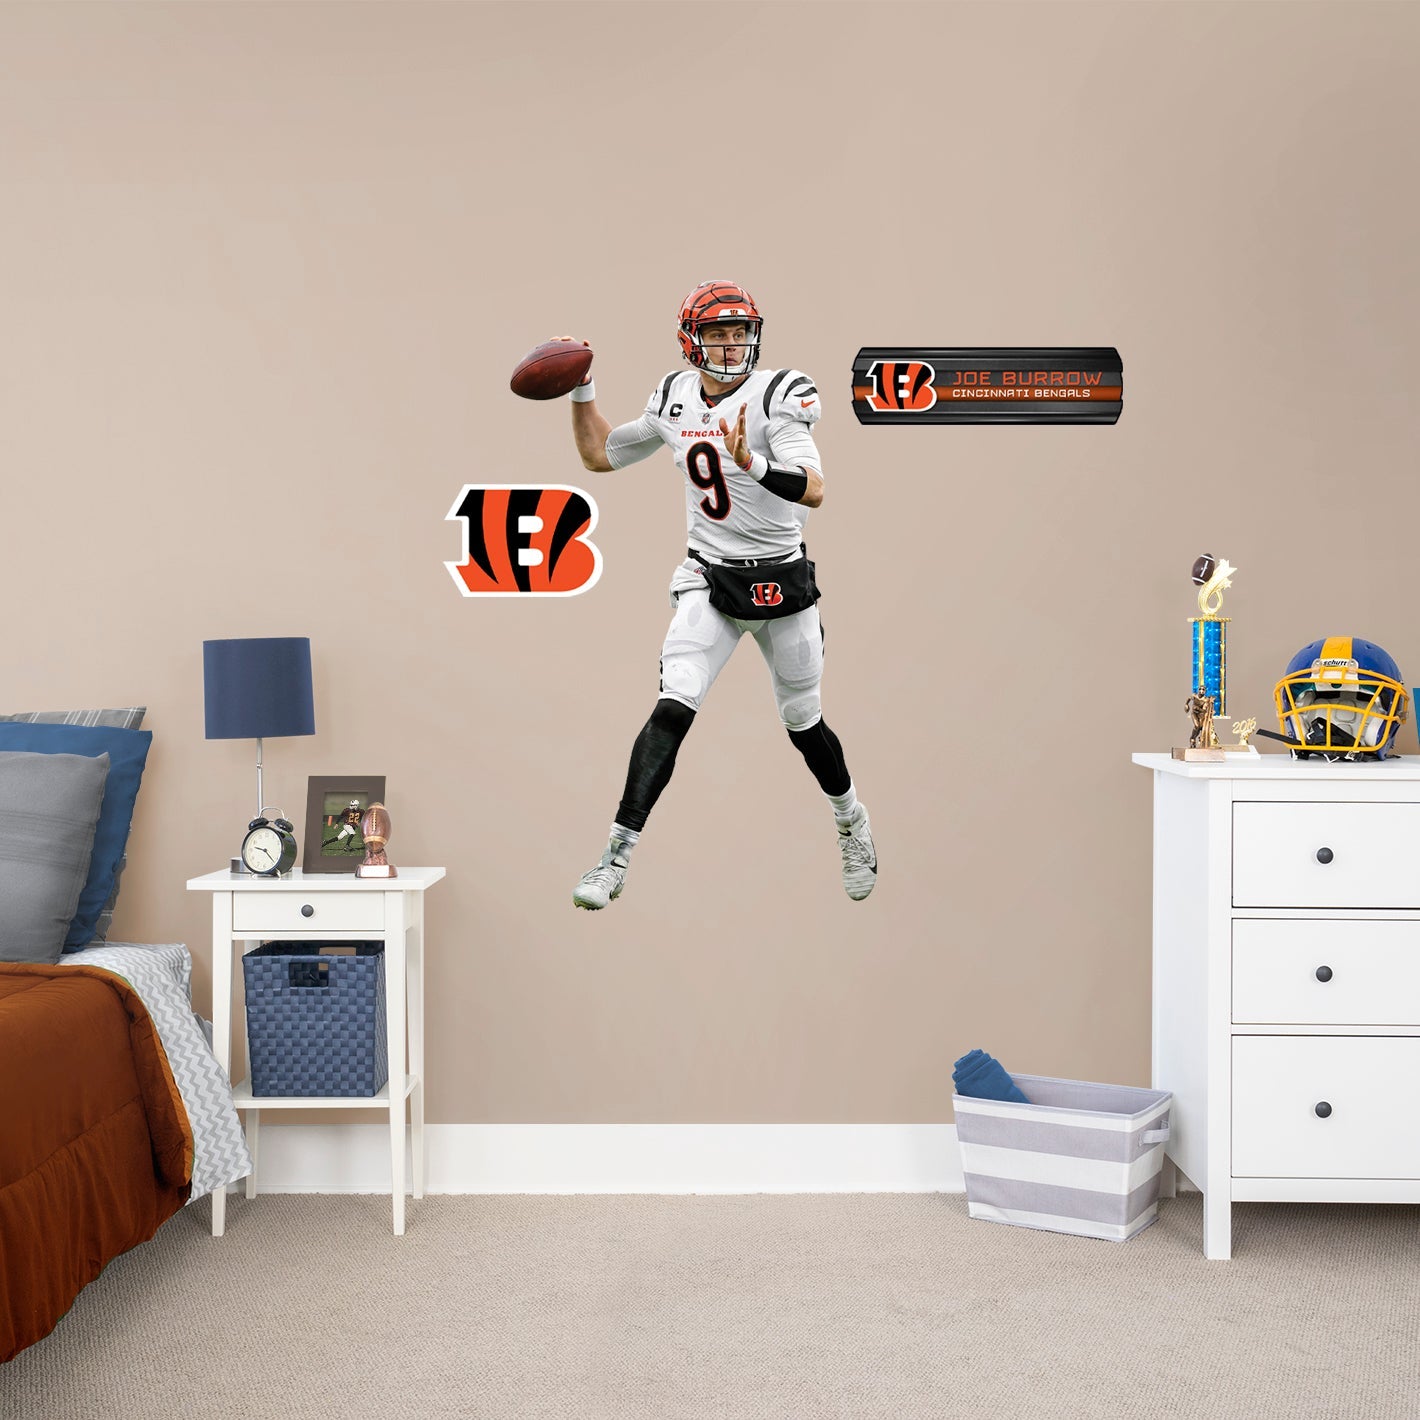 Cincinnati Bengals: Joe Burrow Pass - Officially Licensed NFL Removable Adhesive Decal